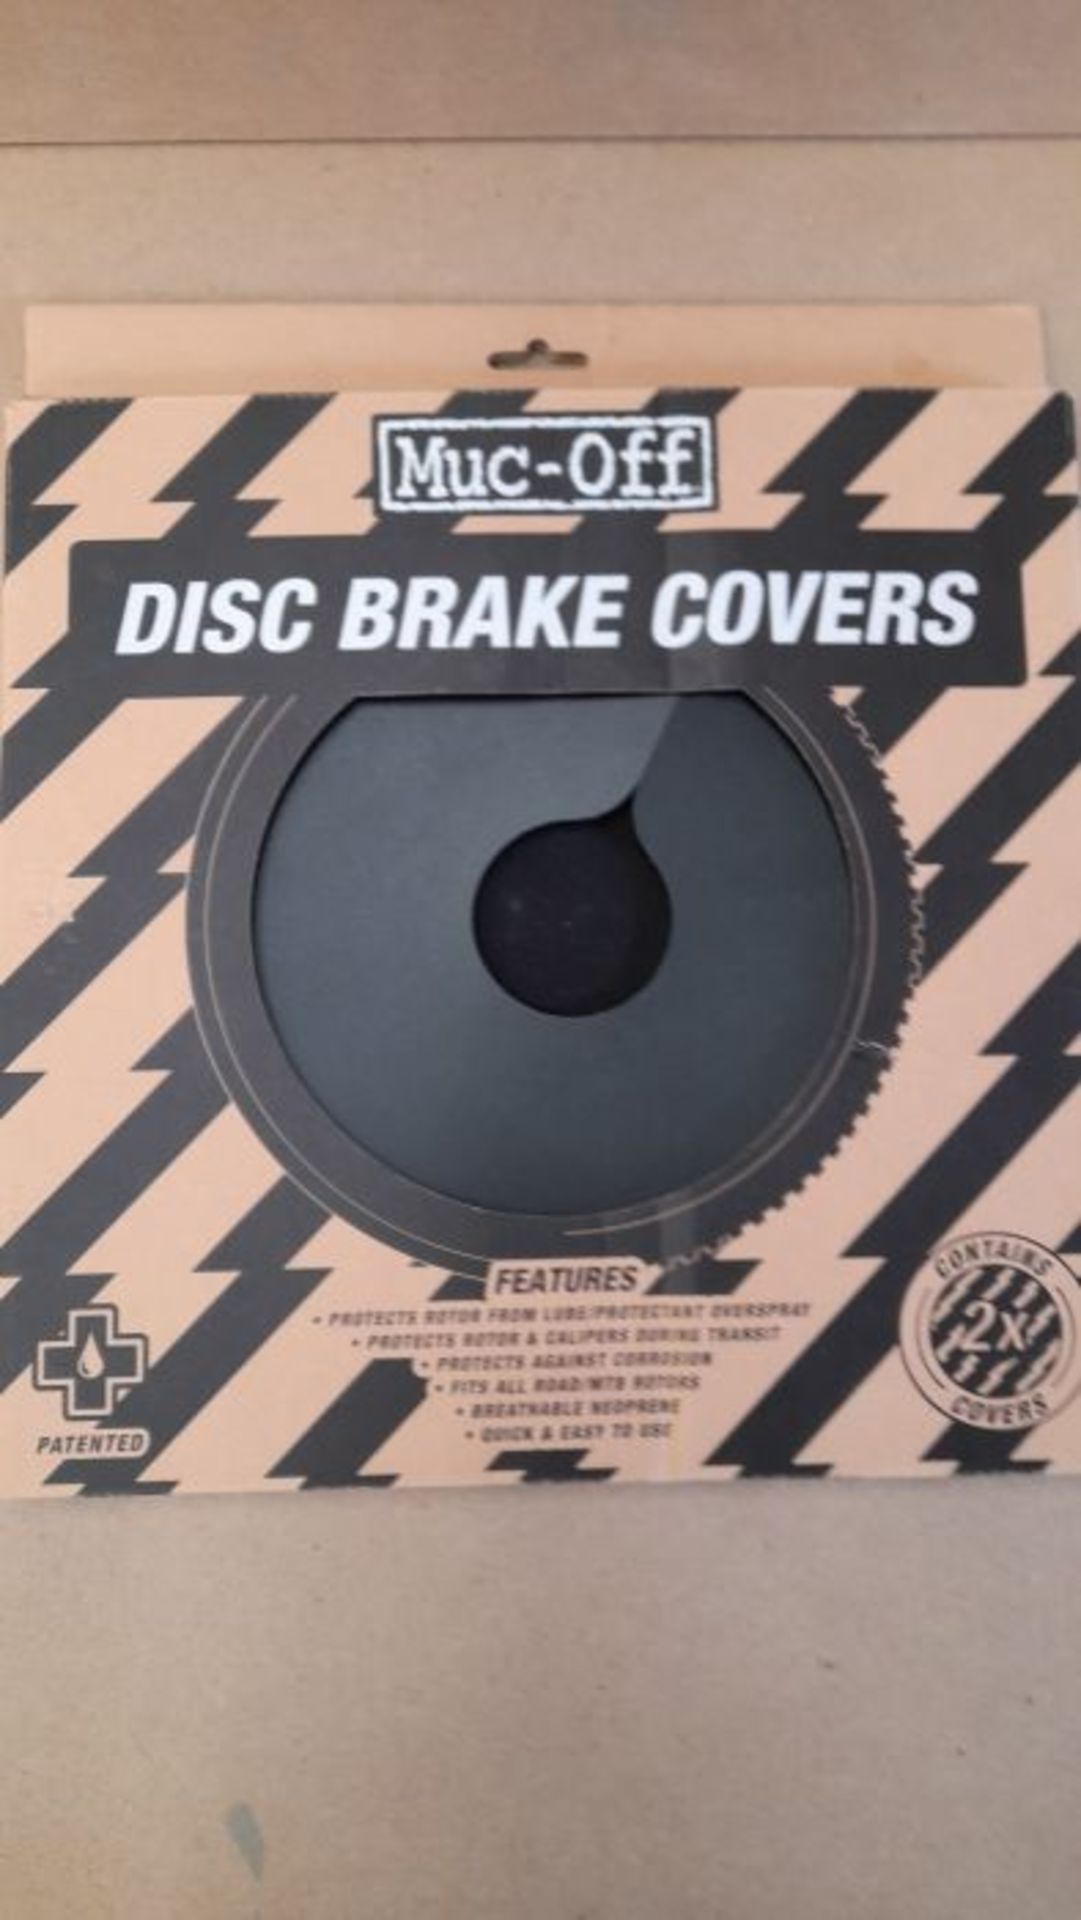 Muc-Off Bolt Disc Brake Covers, Set of 2 - Washable Neoprene Protective Covers for Bic - Image 2 of 3